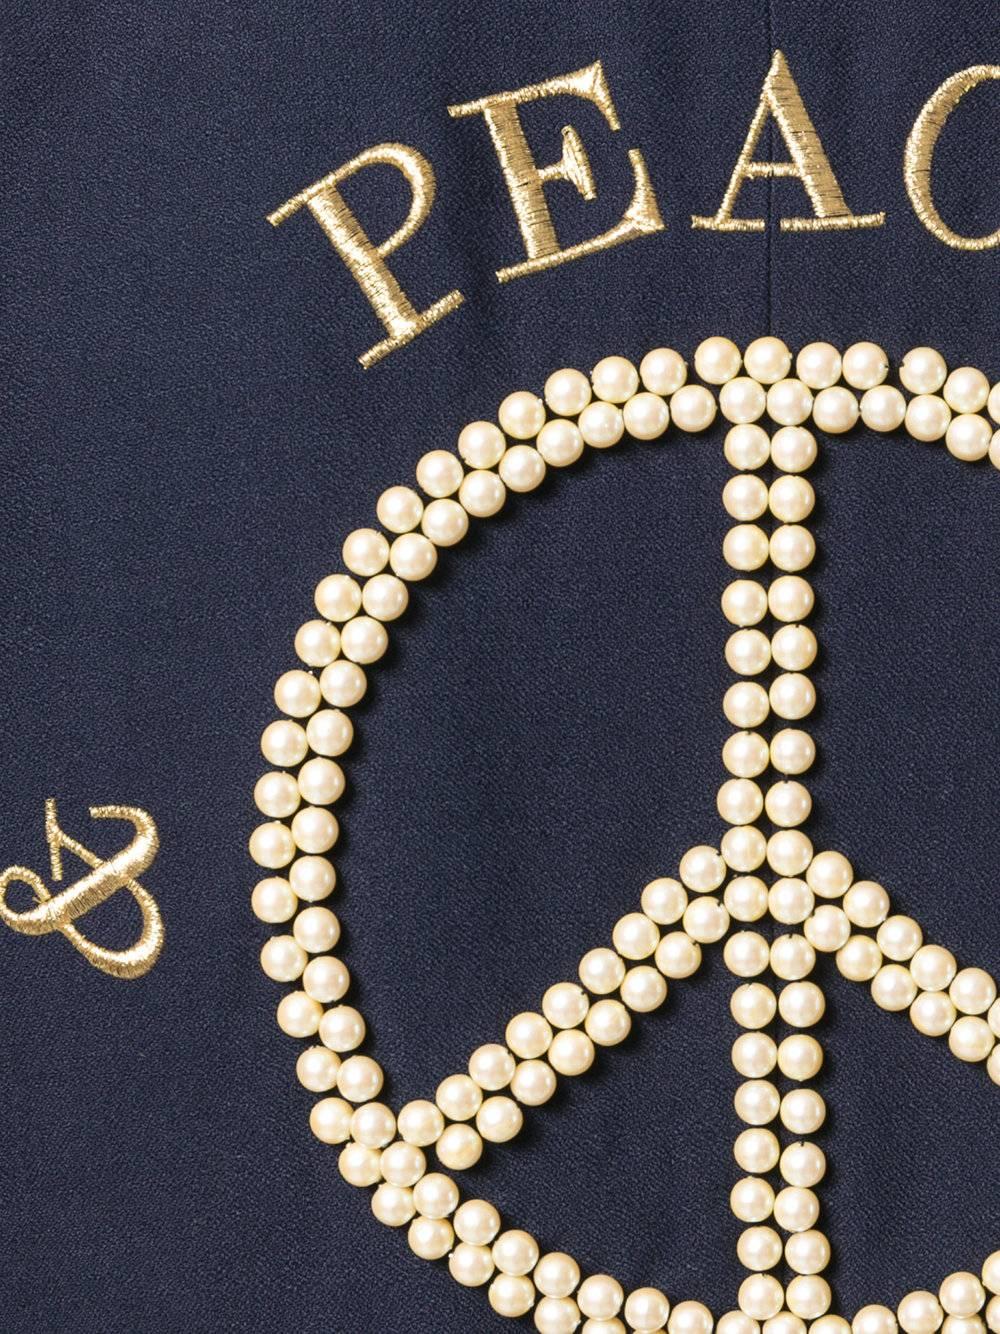 1989 MOSCHINO Couture vintage Peace & Pearls embroidered jacket In Excellent Condition For Sale In London, GB